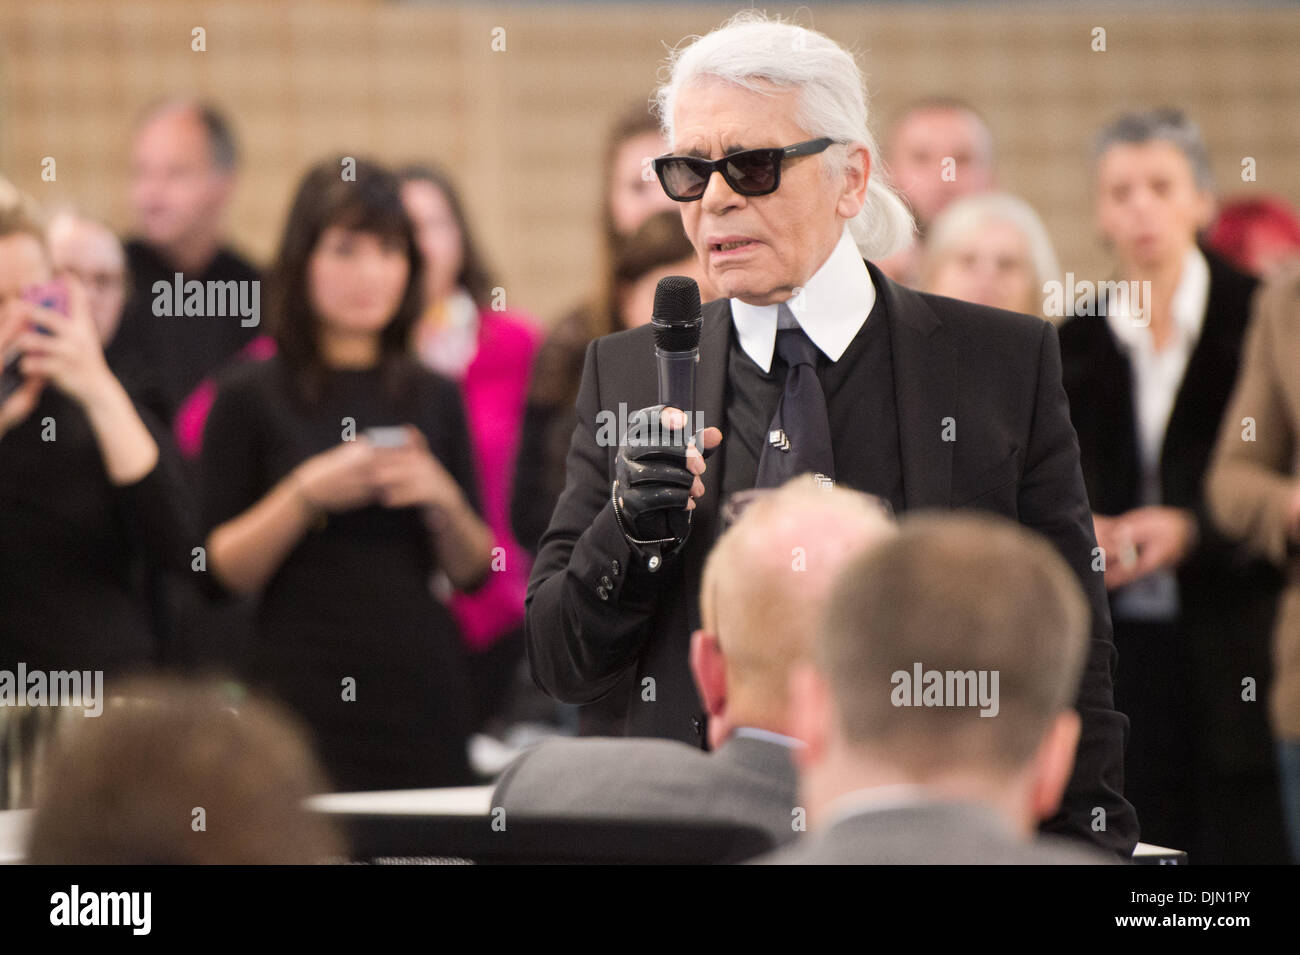 Berlin, Germany. 29th Nov, 2013. Fashion designer Karl Lagerfeld acts as editor-in-chief for the 01 December 2013 edition of Welt am Sonntag and takes part in a editors' conference in Berlin, Germany, 29 November 2013. Photo: MAURIZIO GAMBARINI/dpa/Alamy Live News Stock Photo